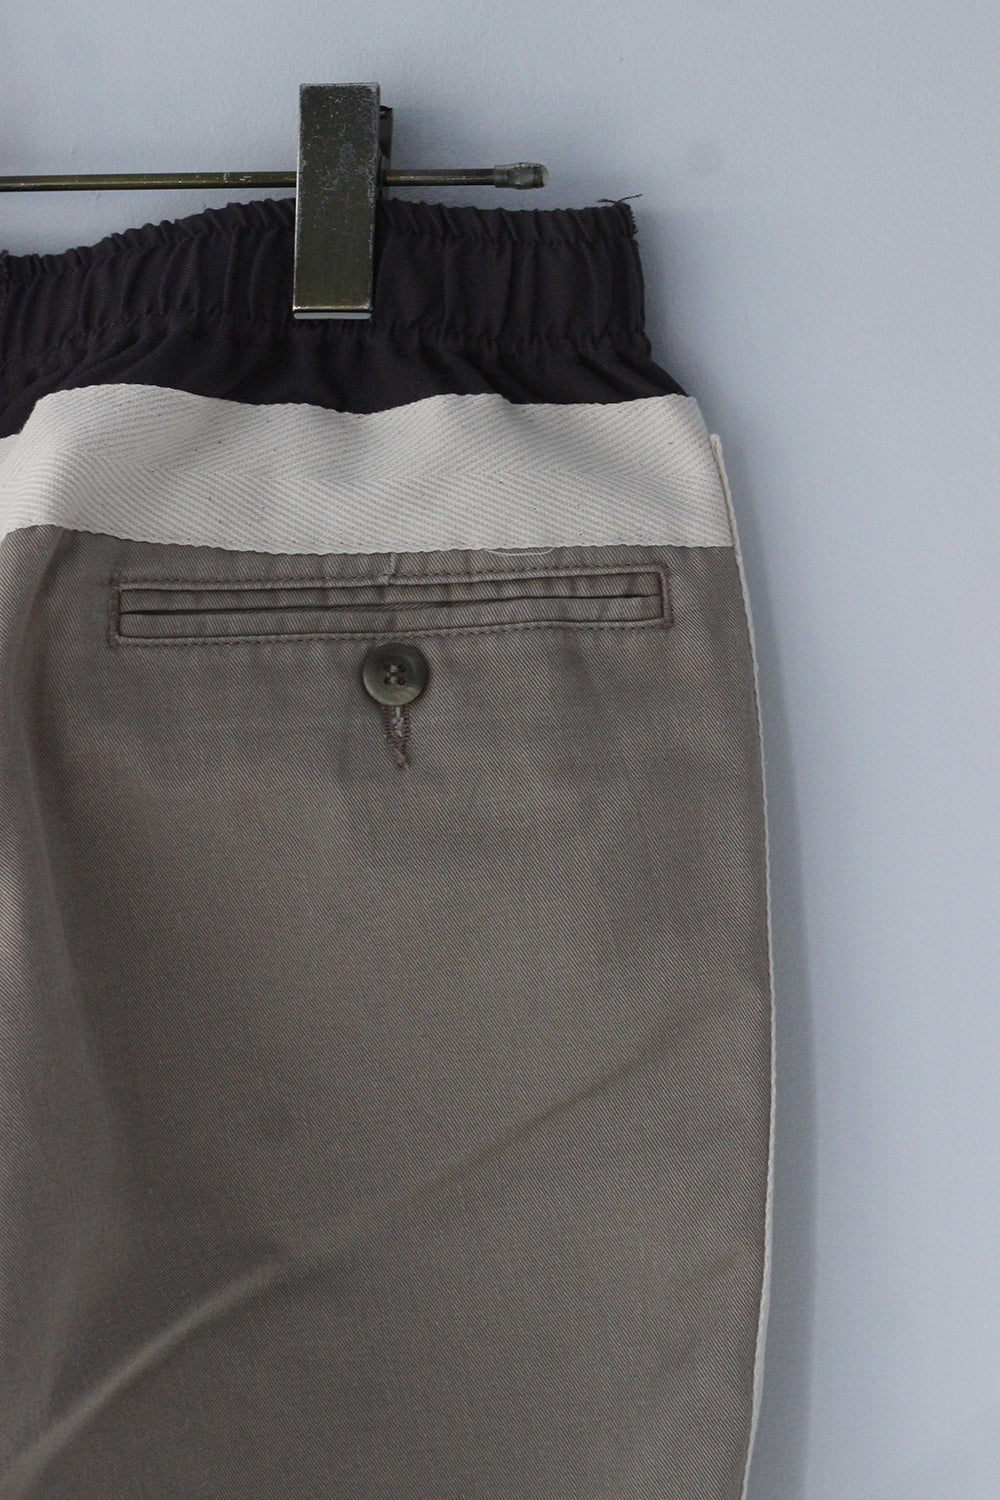 Rebuild by Needles "Chino Pant -> Covered Pant" (charcoal) 2